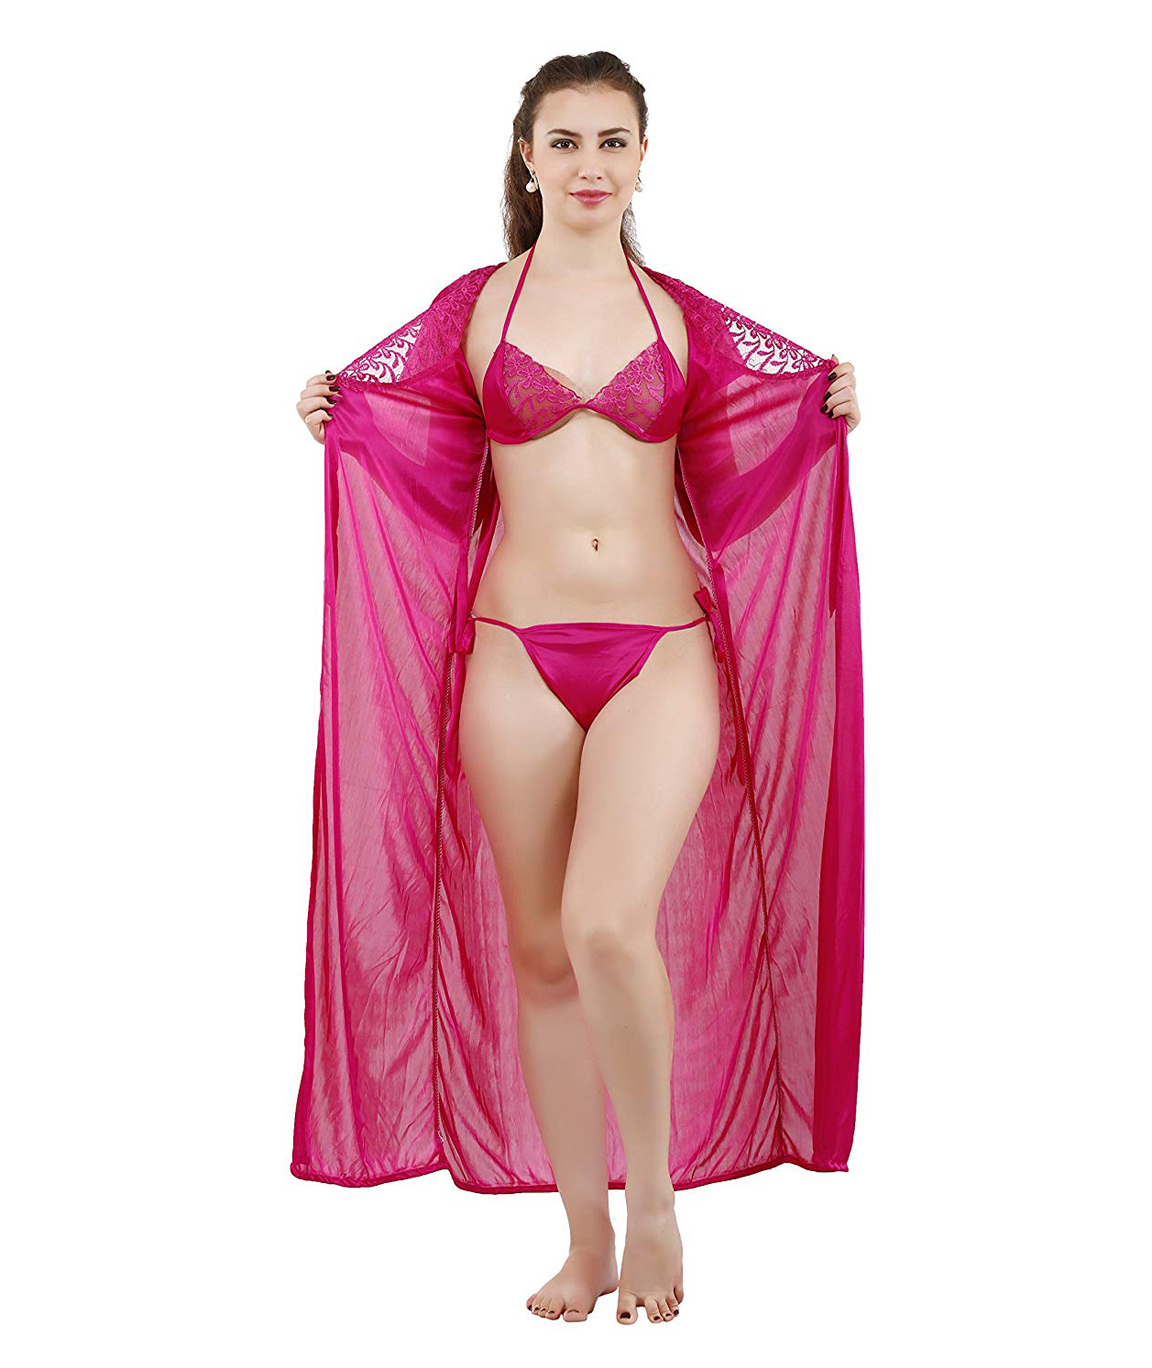 https://www.manthanonline.in/uploadImages/productimage/romaisa-women-s-satin-nighty-wrap-gown-top-pajama-bra-and-thong-free-size-pack-of-6-colour-pale-violet-red-z1.jpg